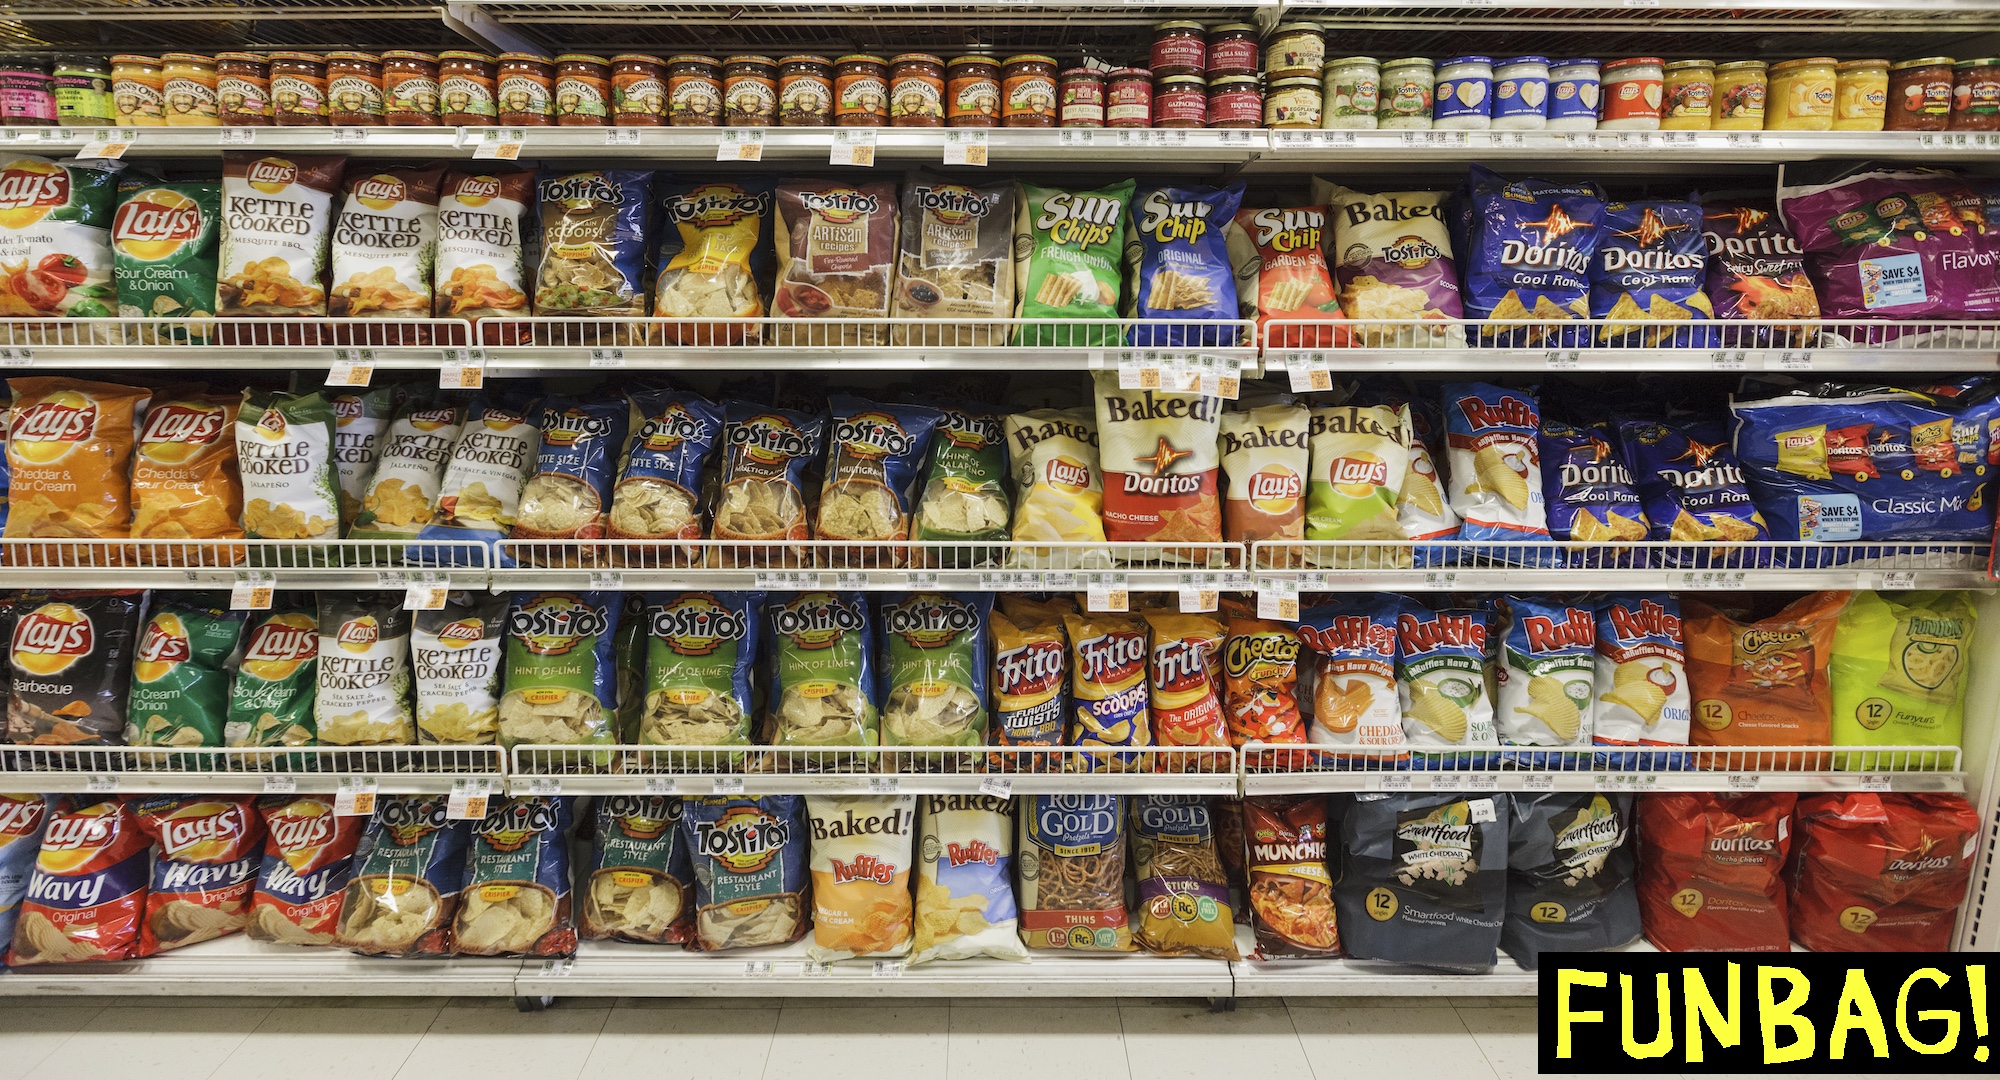 06/08/12 - Midland Park, NJ - A supermarket shelf at a Kings Food Market in Midland Park, New Jersey filled mostly with Frito-Lay brands of chips.